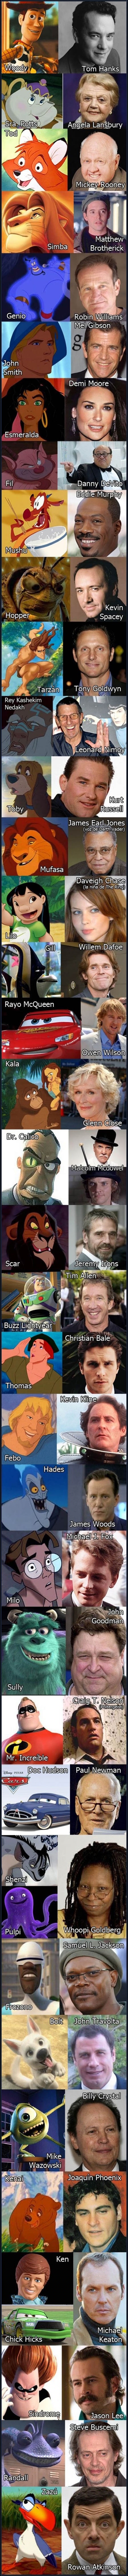 Animated Characters and Their Voice Actor Counterparts!